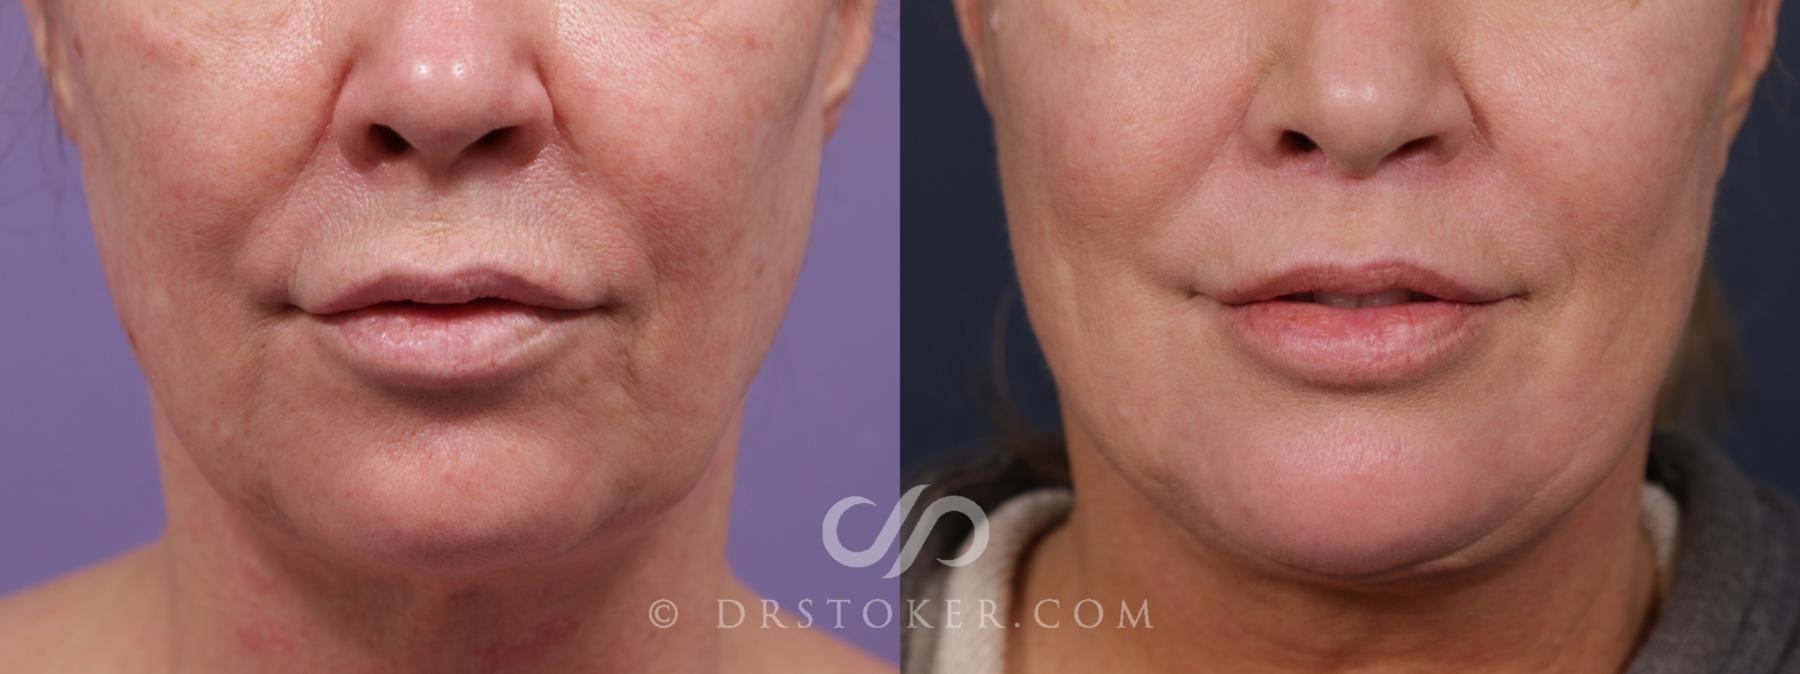 Before & After Lip Lift Case 2002 Front View in Los Angeles, CA